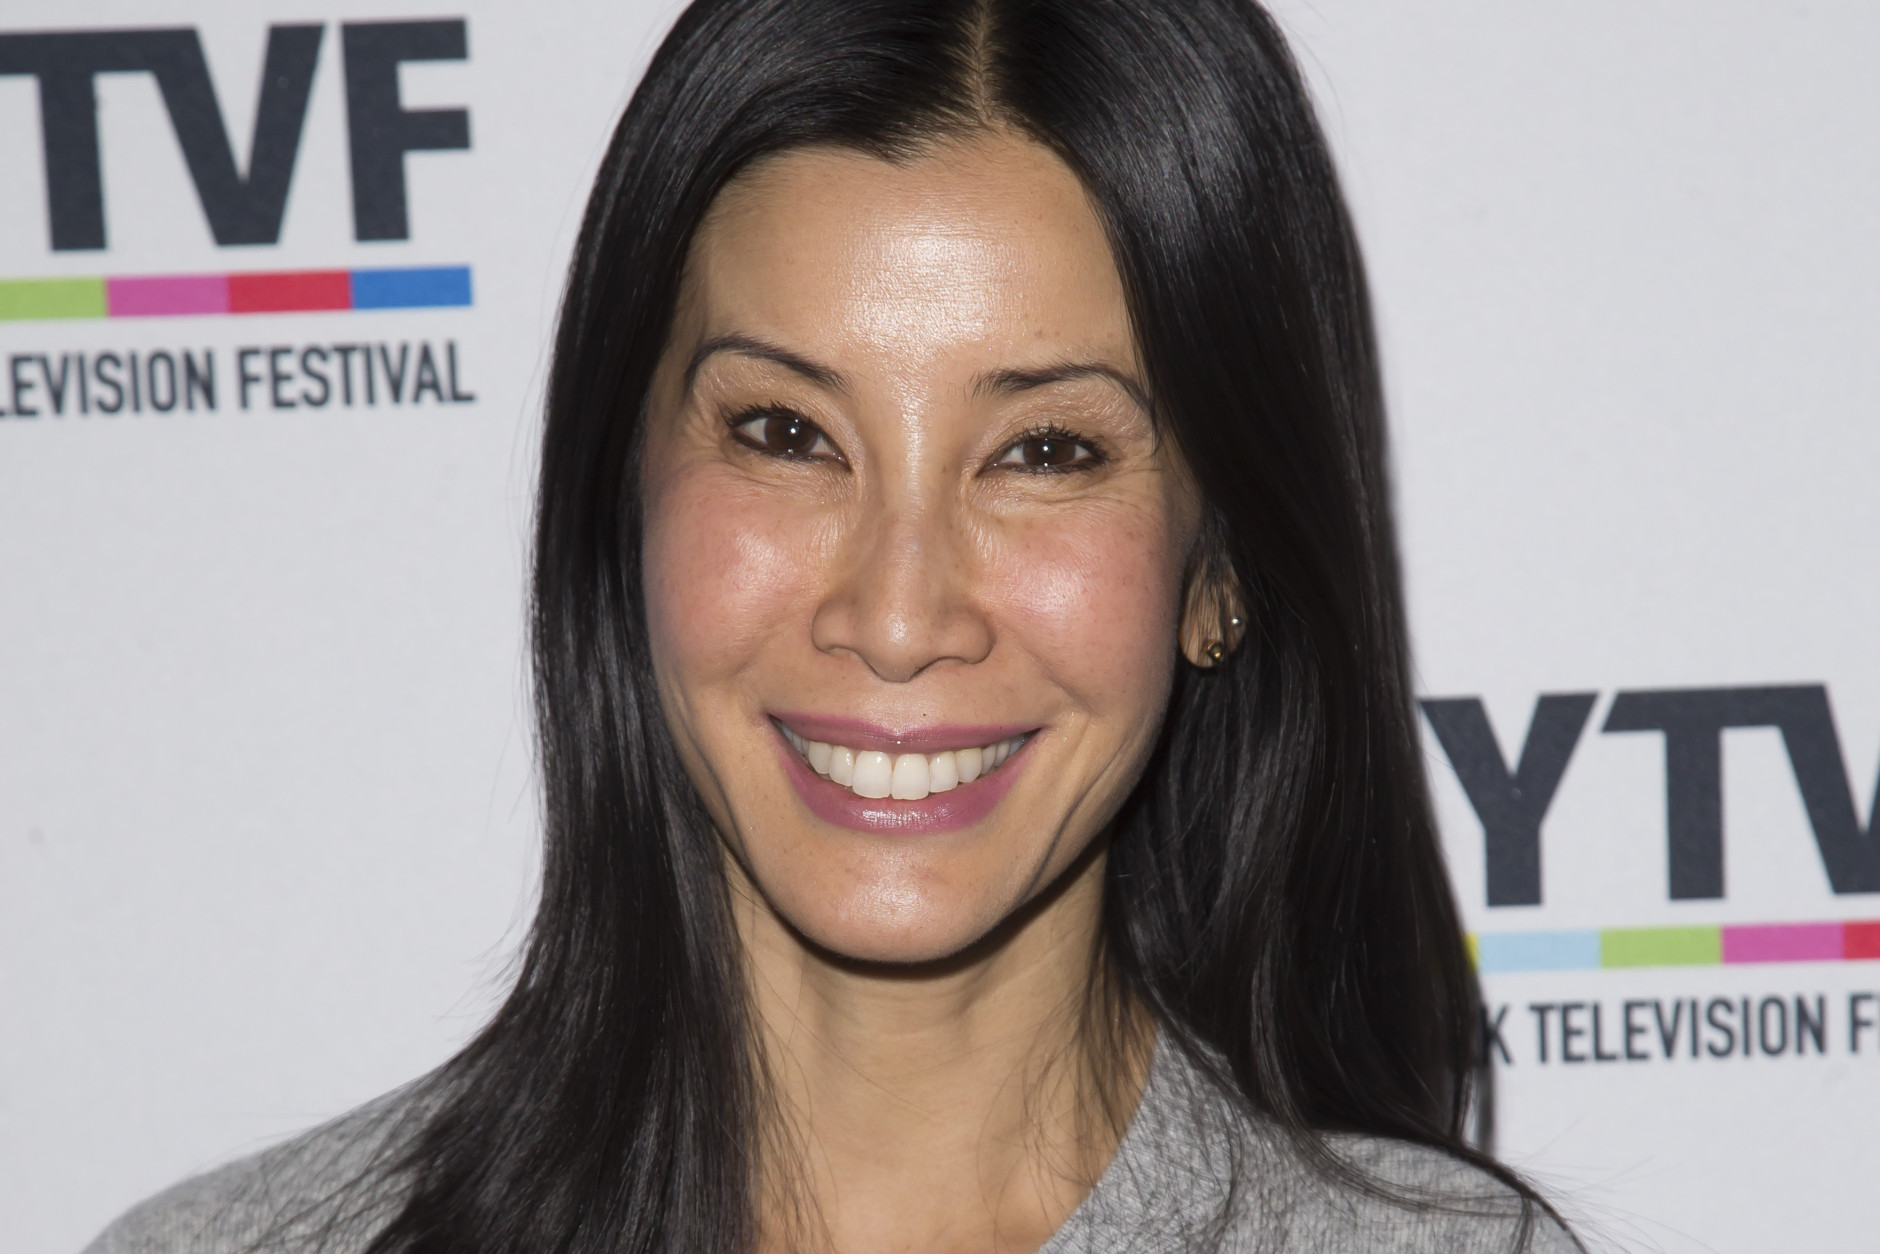 Lisa Ling attends the 11th Annual New York Television Festival "CNN Presents: An Original Take on the Stories of Now" at the SVA Theatre on Tuesday, Oct. 20, 2015, in New York. (Photo by Ben Hider/Invision/AP)